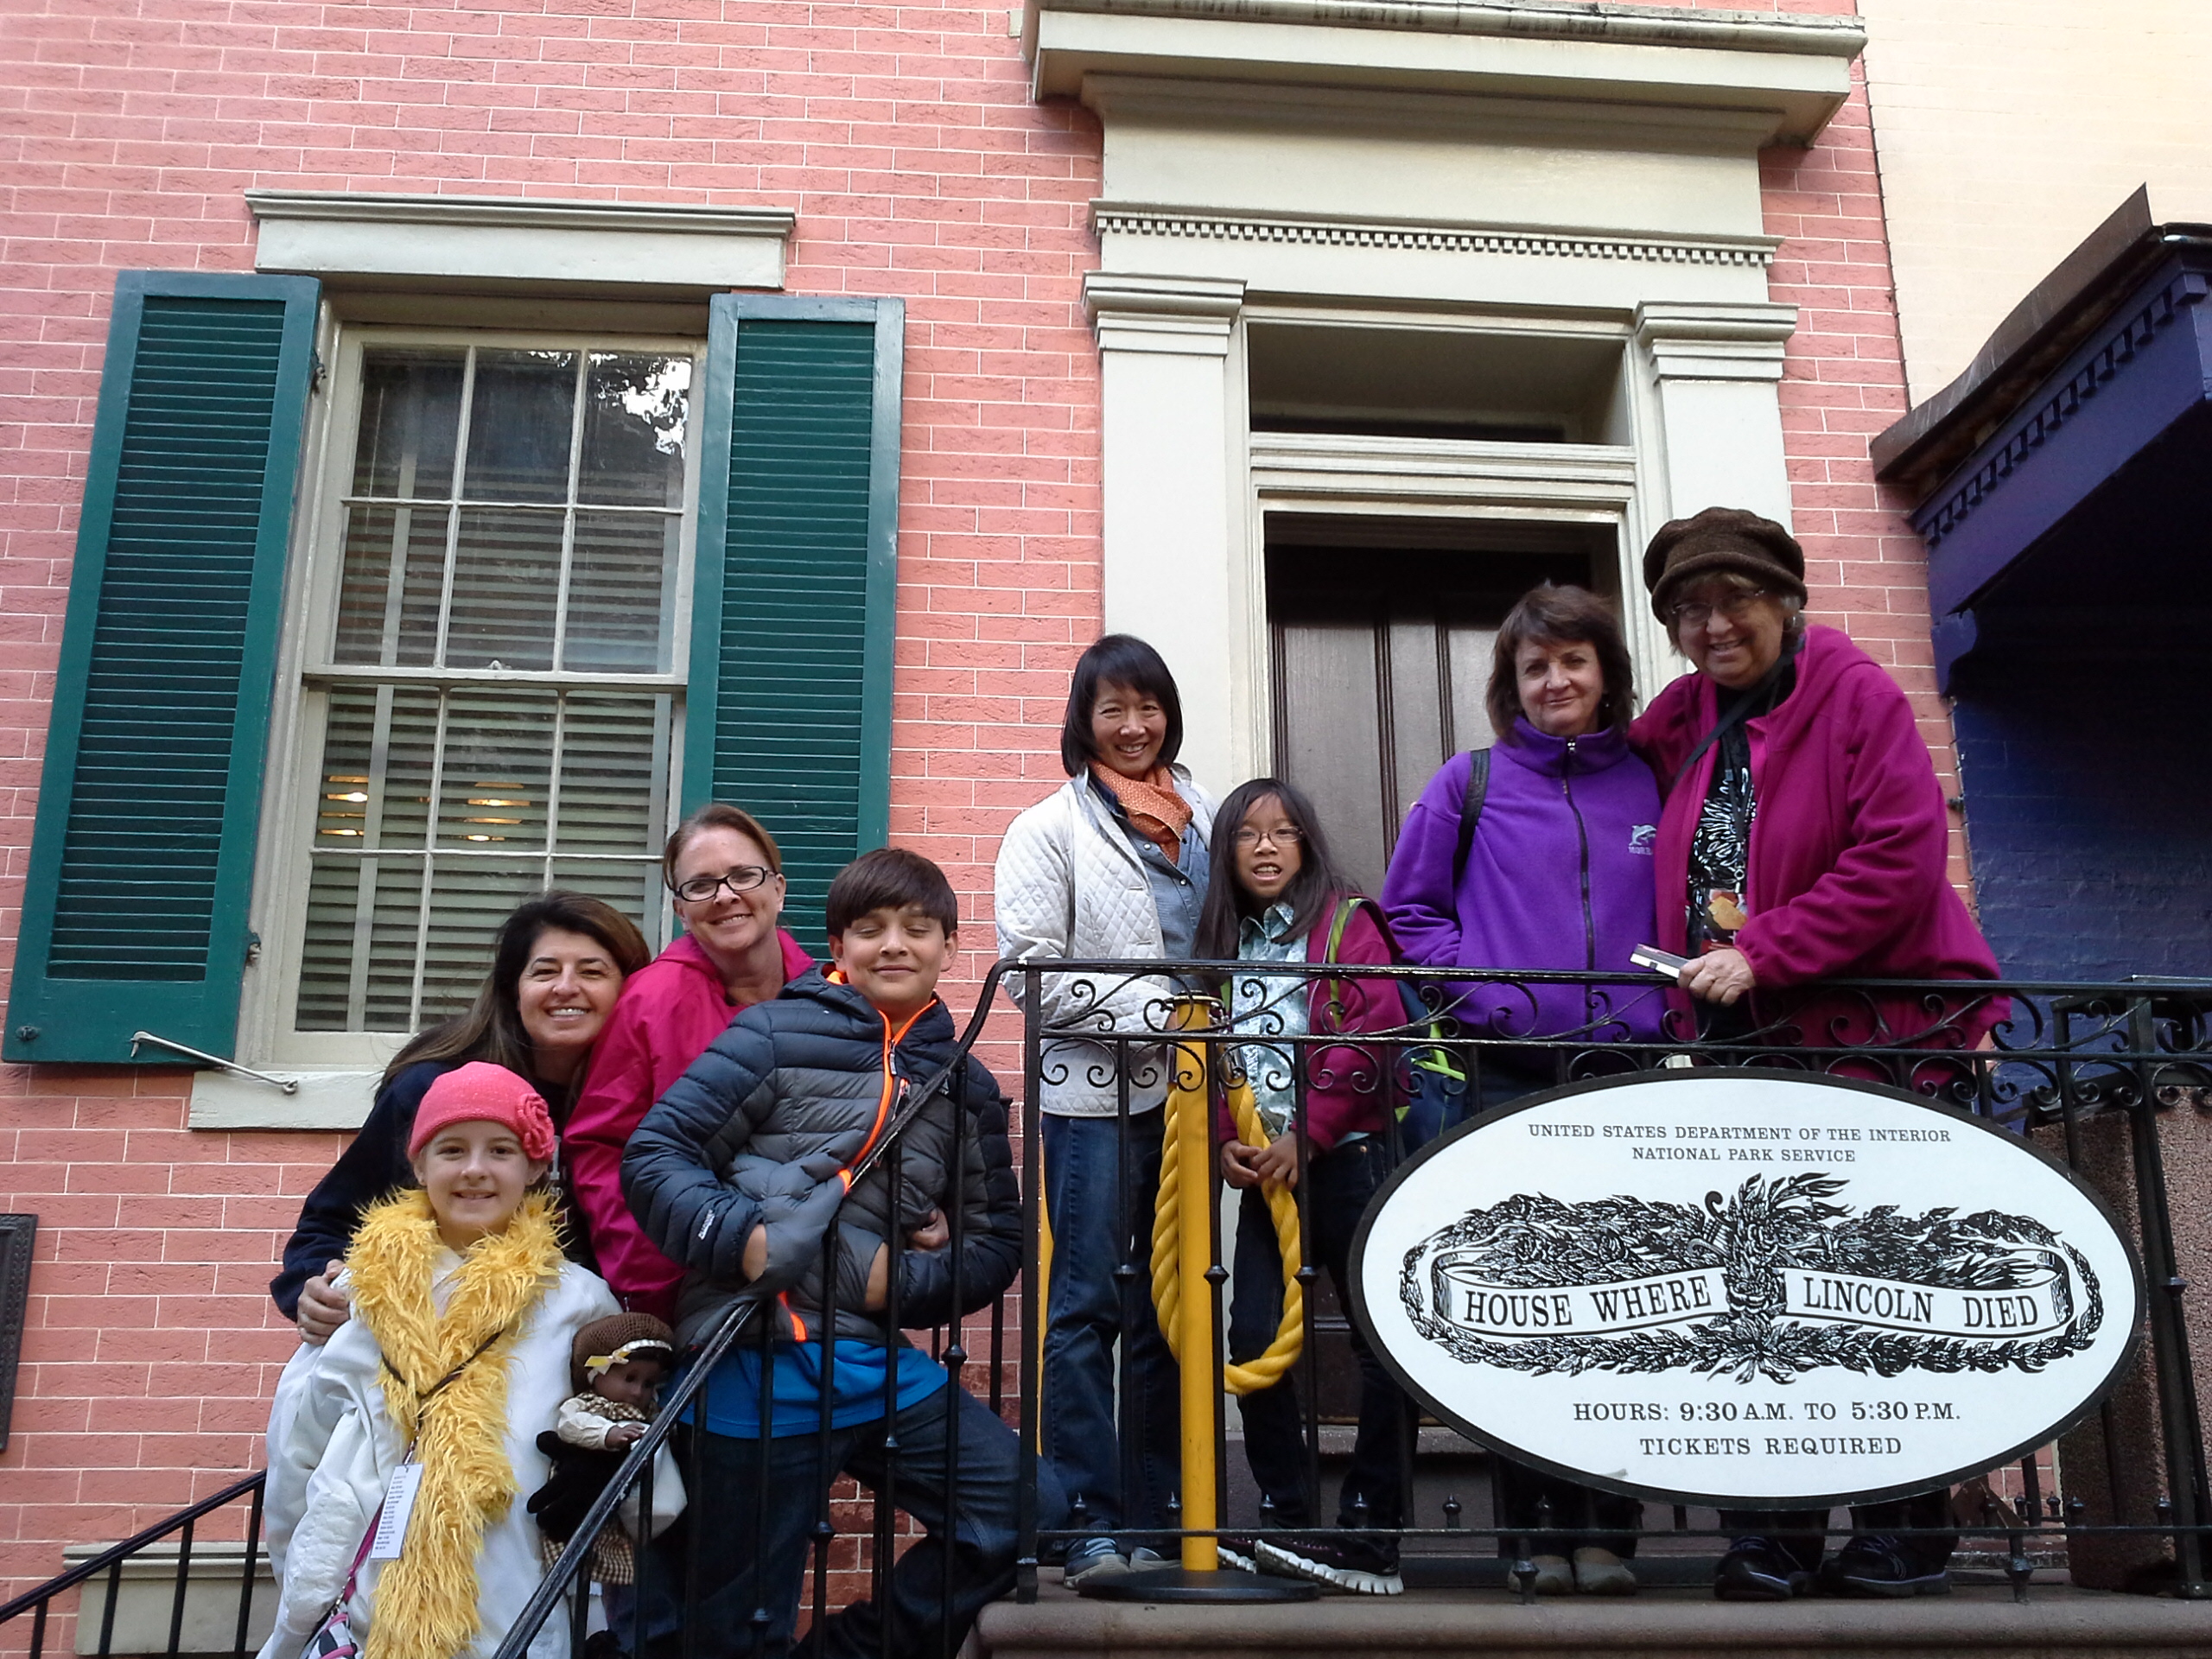 Adults and children standing on the steps of 14 Petersen House where Lincoln died